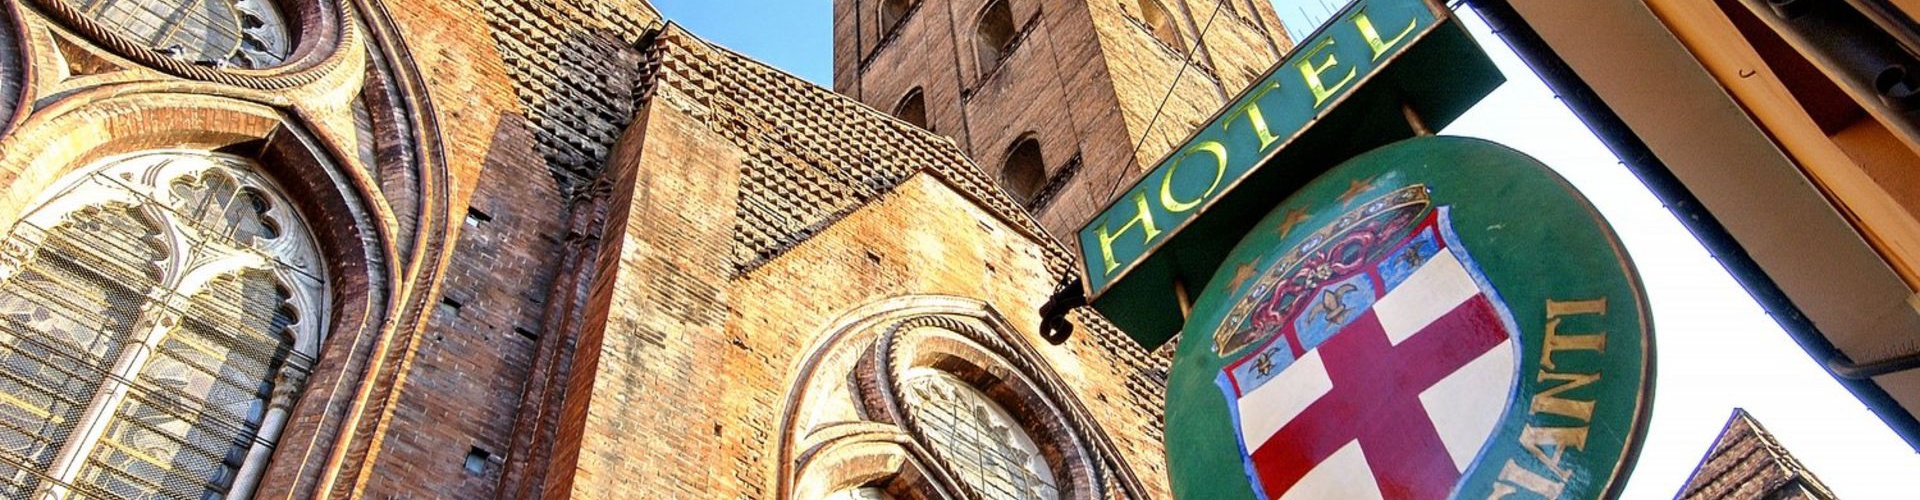 Commercianti Hotel rediseño - Bologna - The Etruscan city: the other face of Bologna